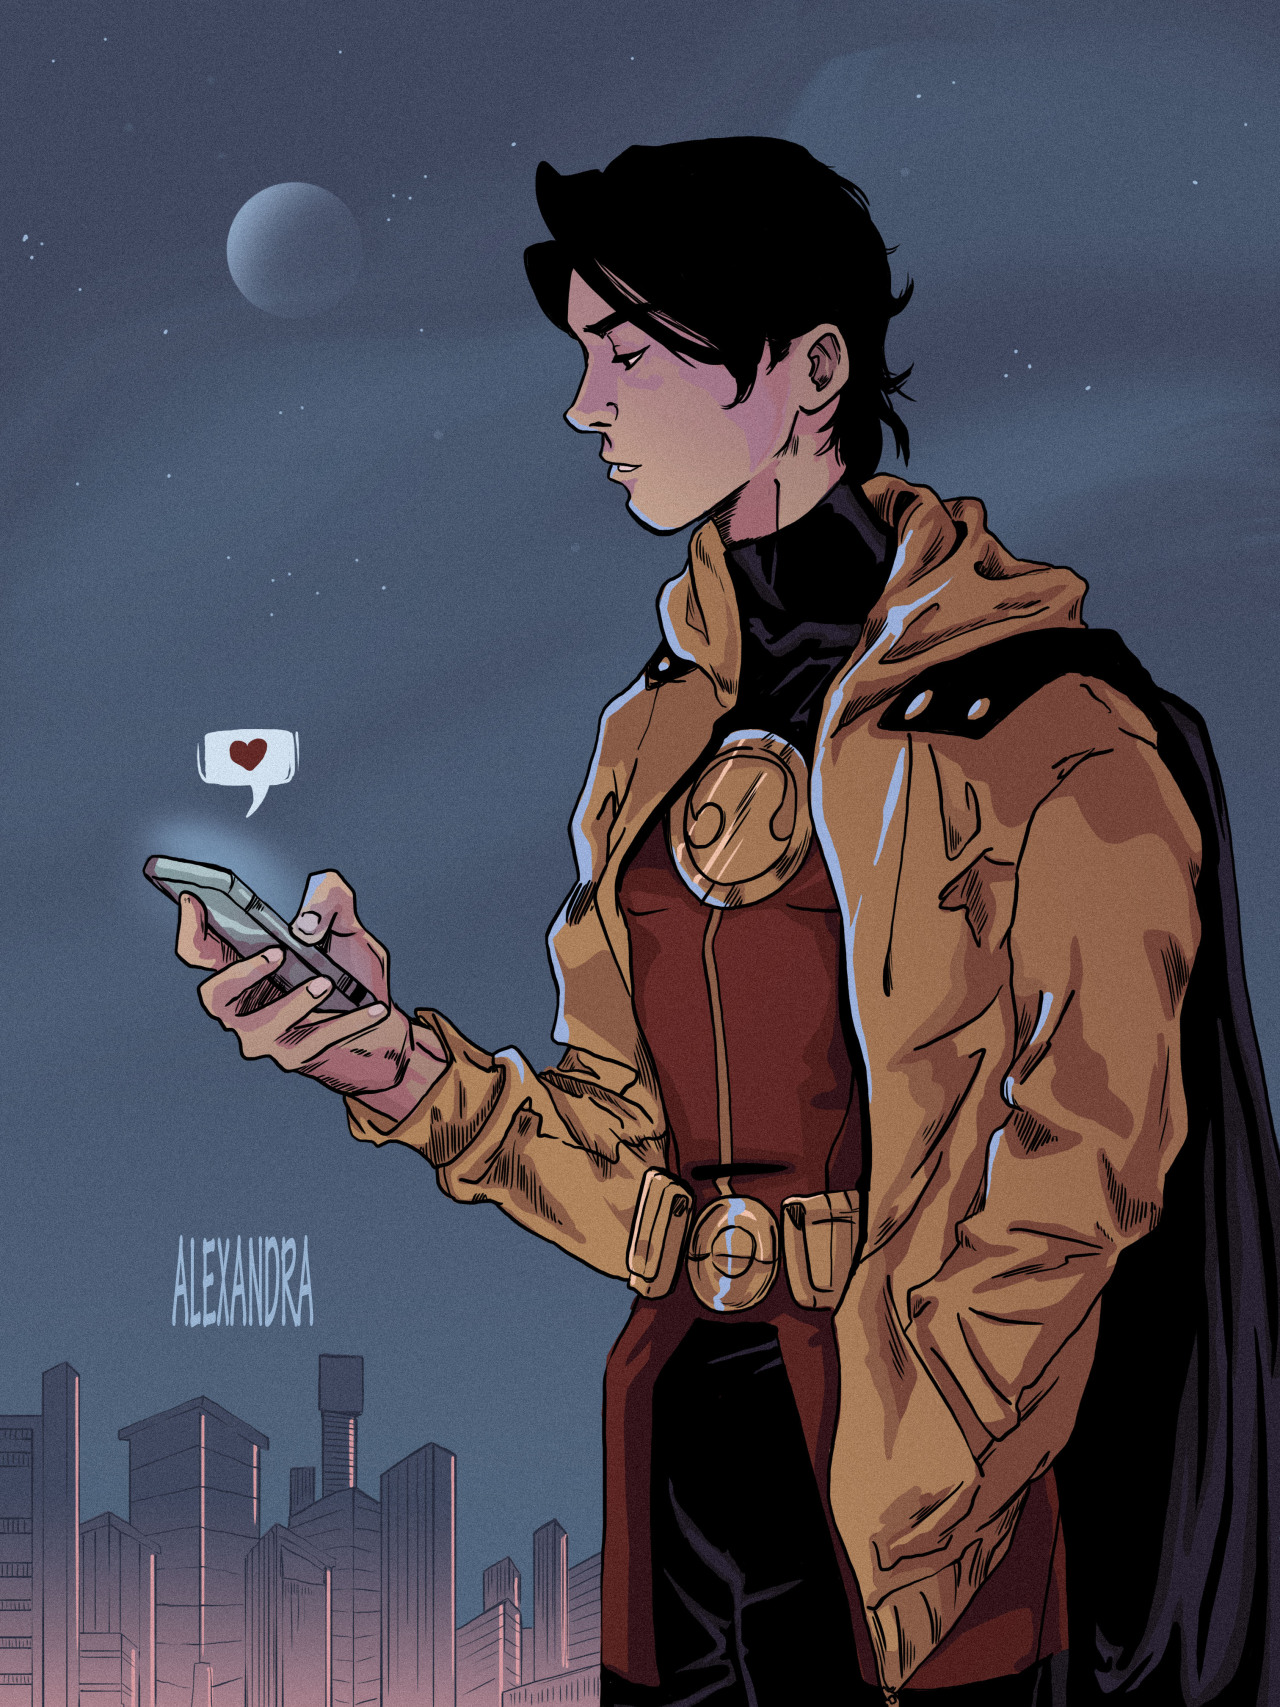 Tim Drake quick drawingWho is he texting? You can fill in the blank ;)